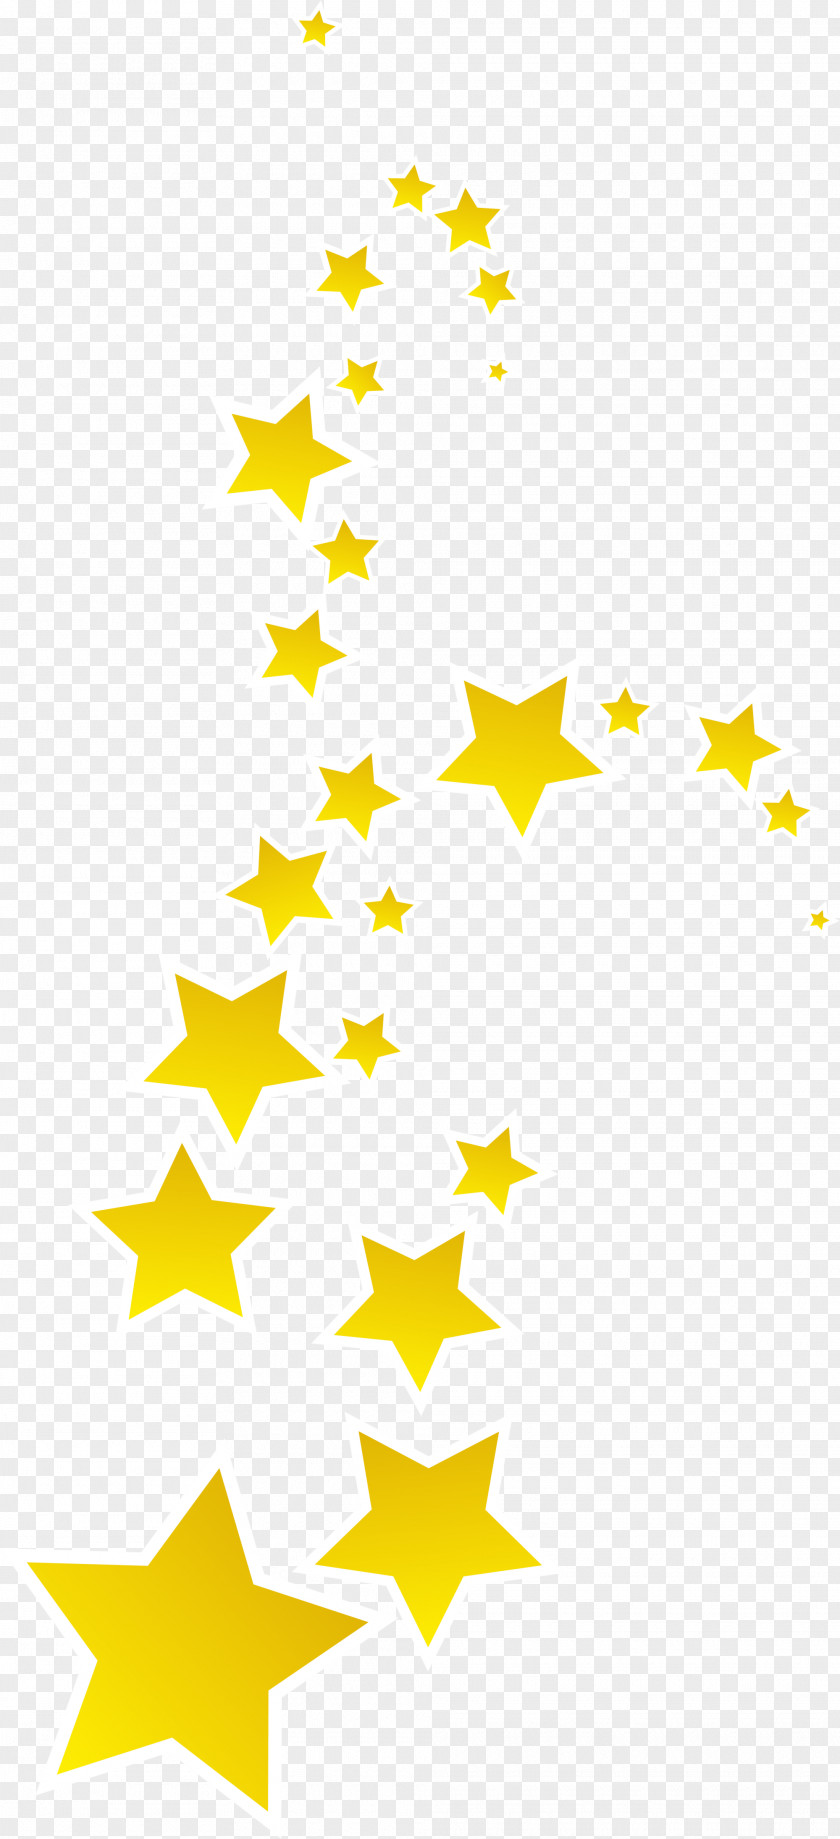 Yellow Floating Stars Indiana National Organization For Women Princess Truly In I Am (Princess Truly) Feminism PNG